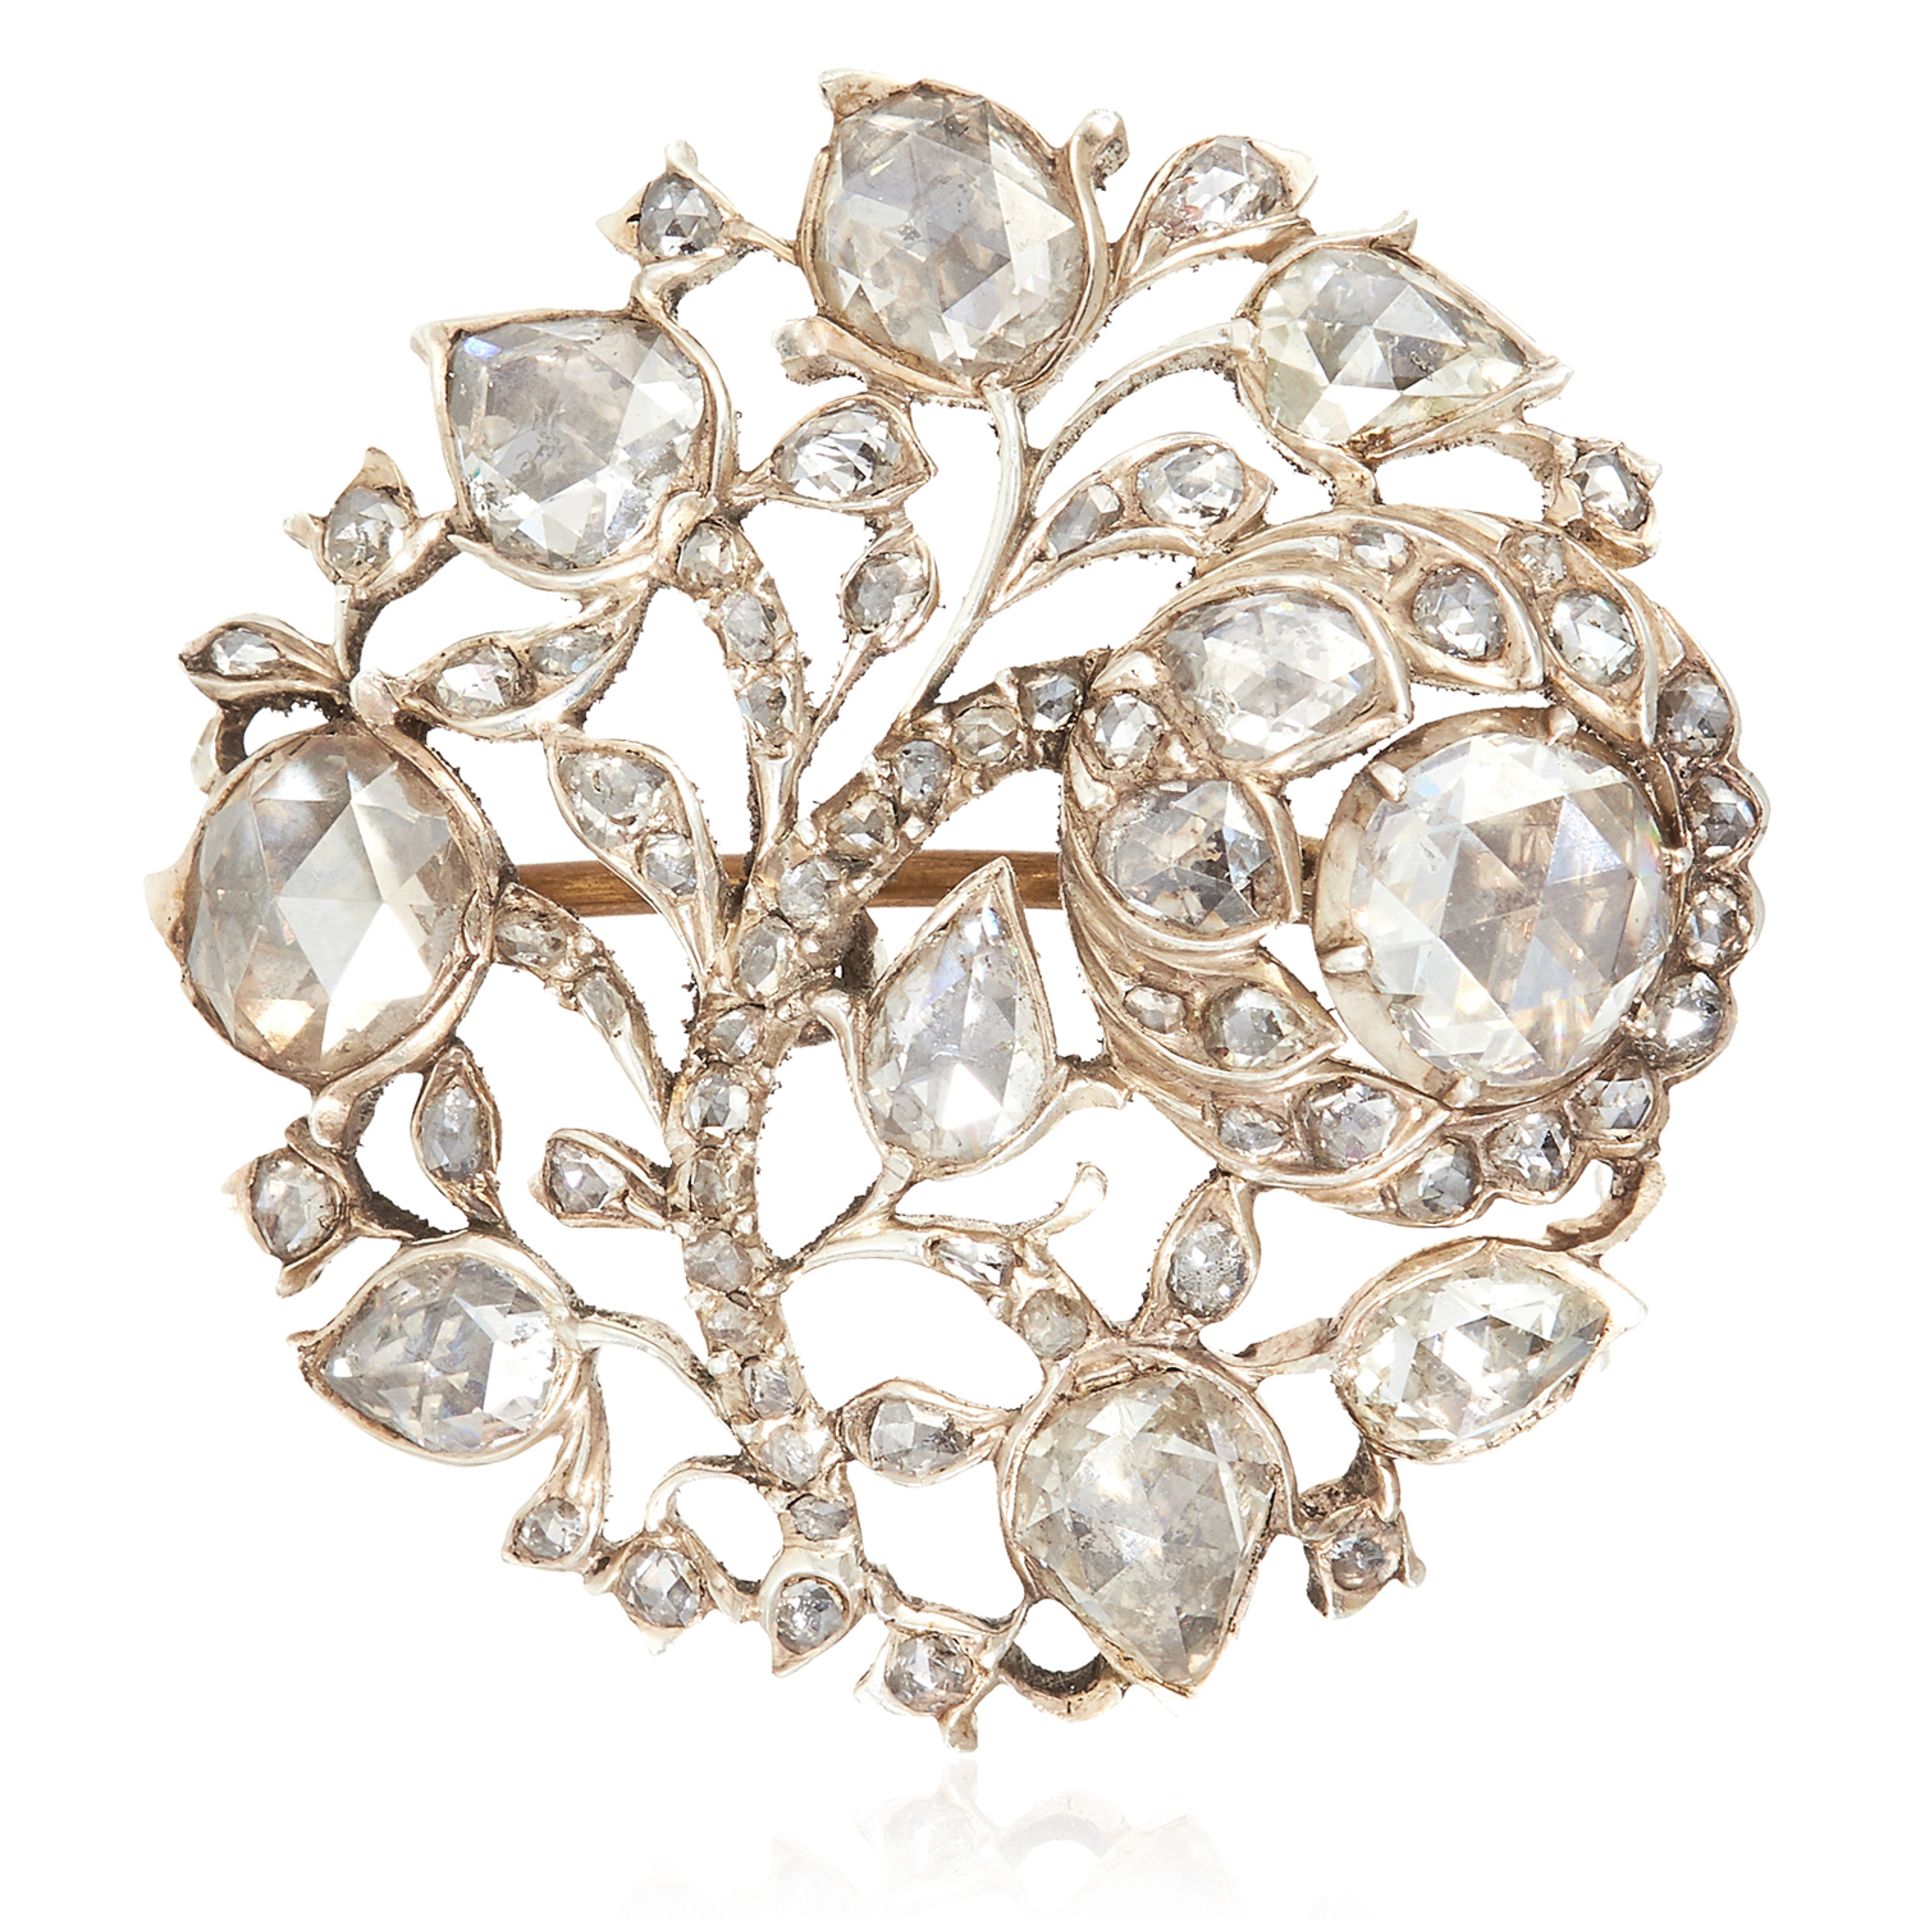 AN ANTIQUE DIAMOND BROOCH, 19TH CENTURY possibly Colonial, of circular form with foliate and